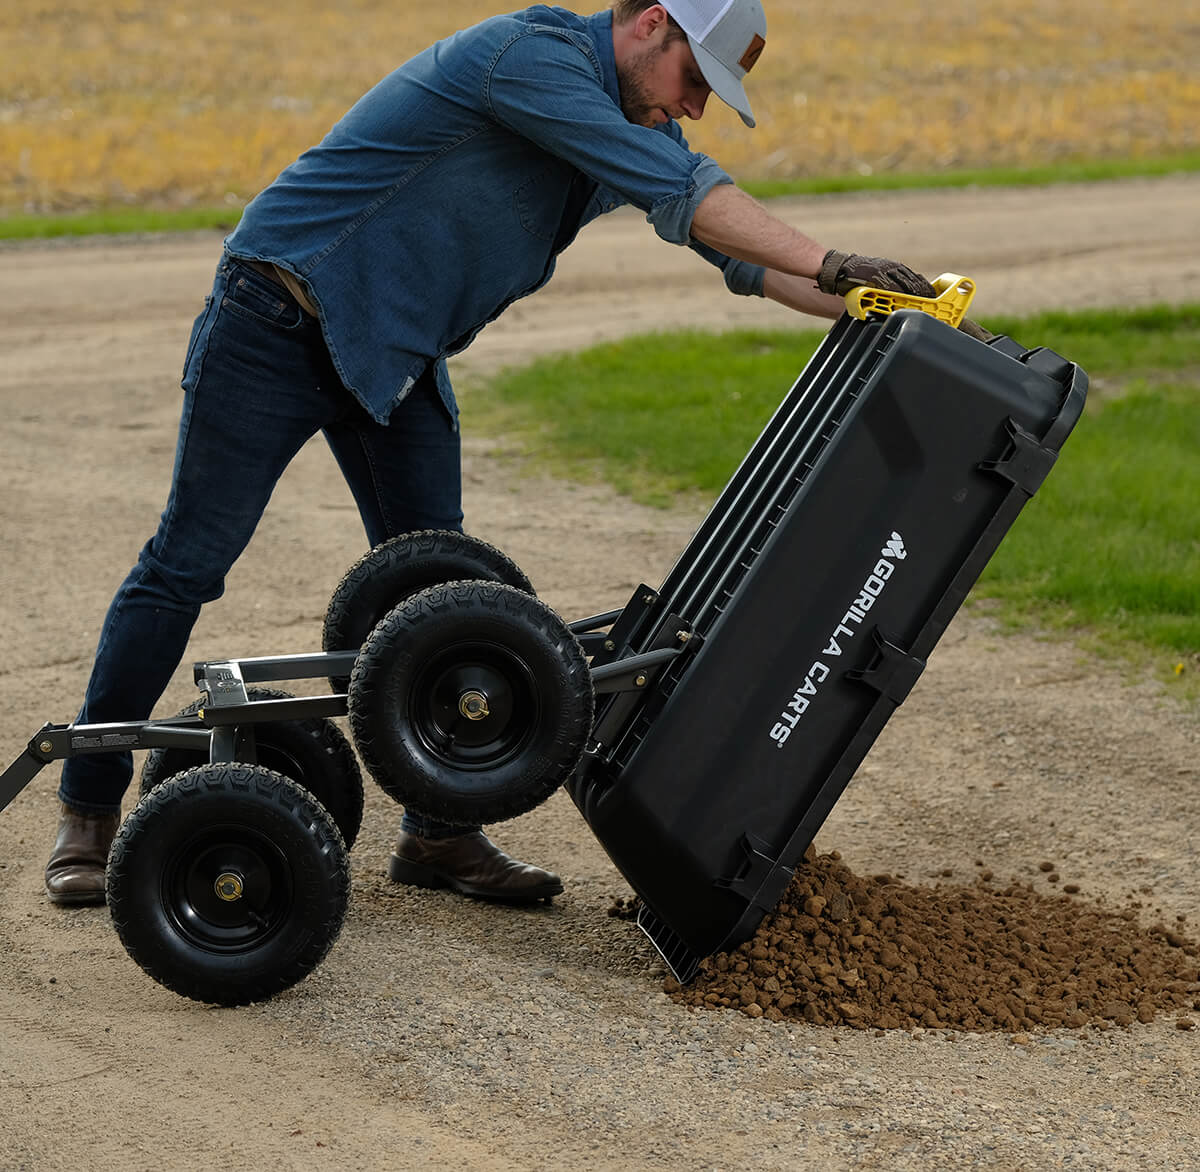 Man pouring dirt out of a GCG-7